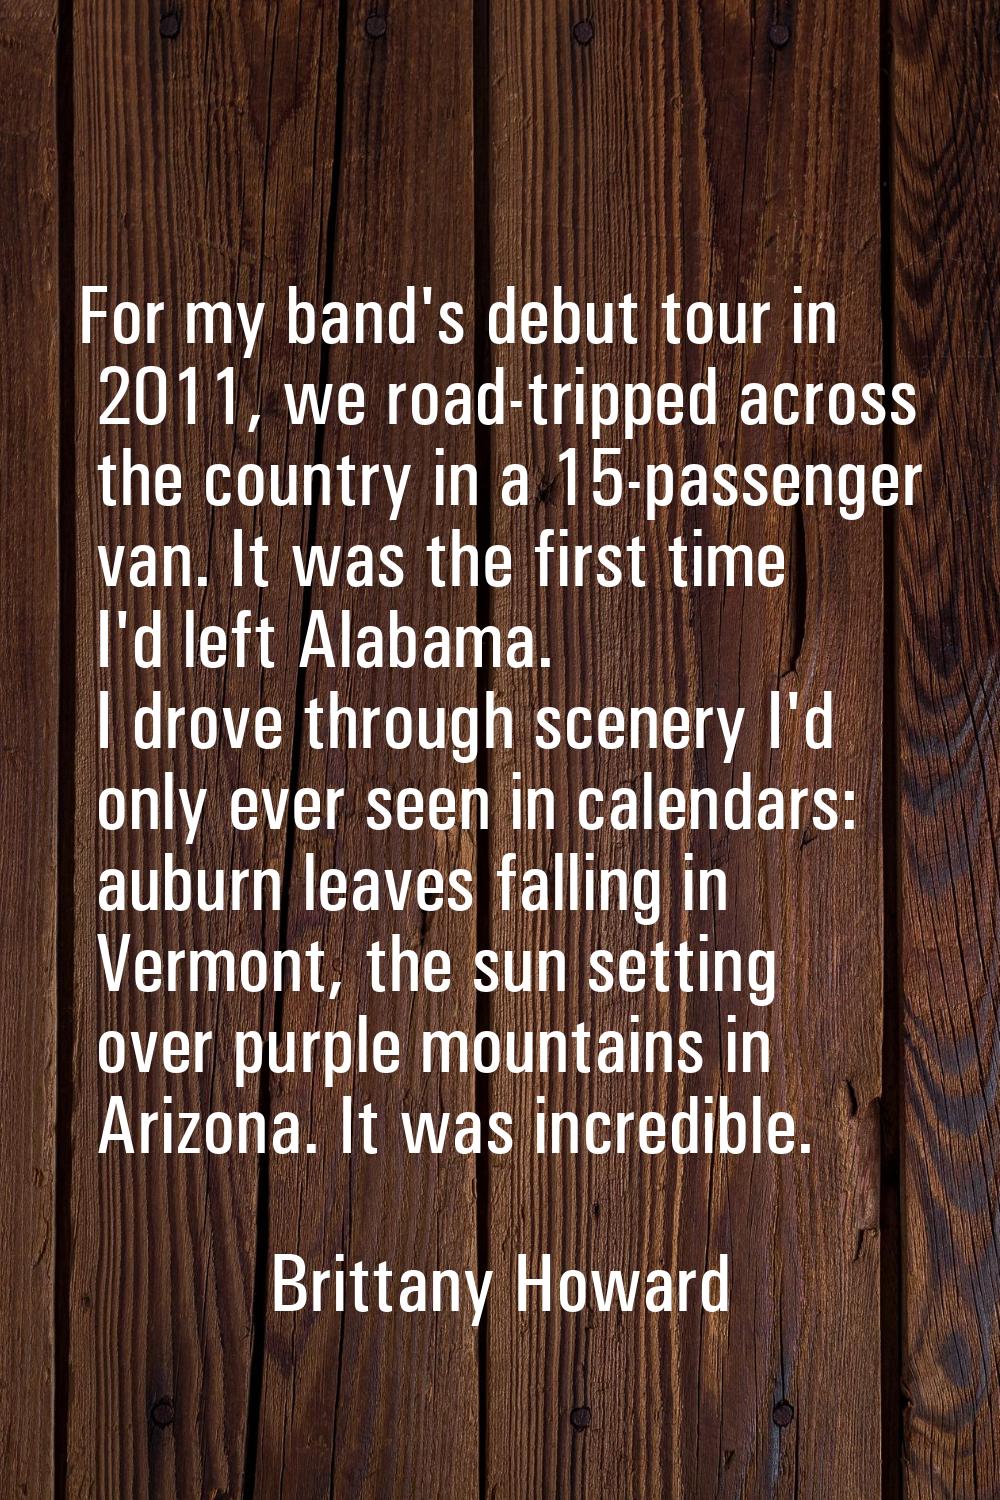 For my band's debut tour in 2011, we road-tripped across the country in a 15-passenger van. It was 